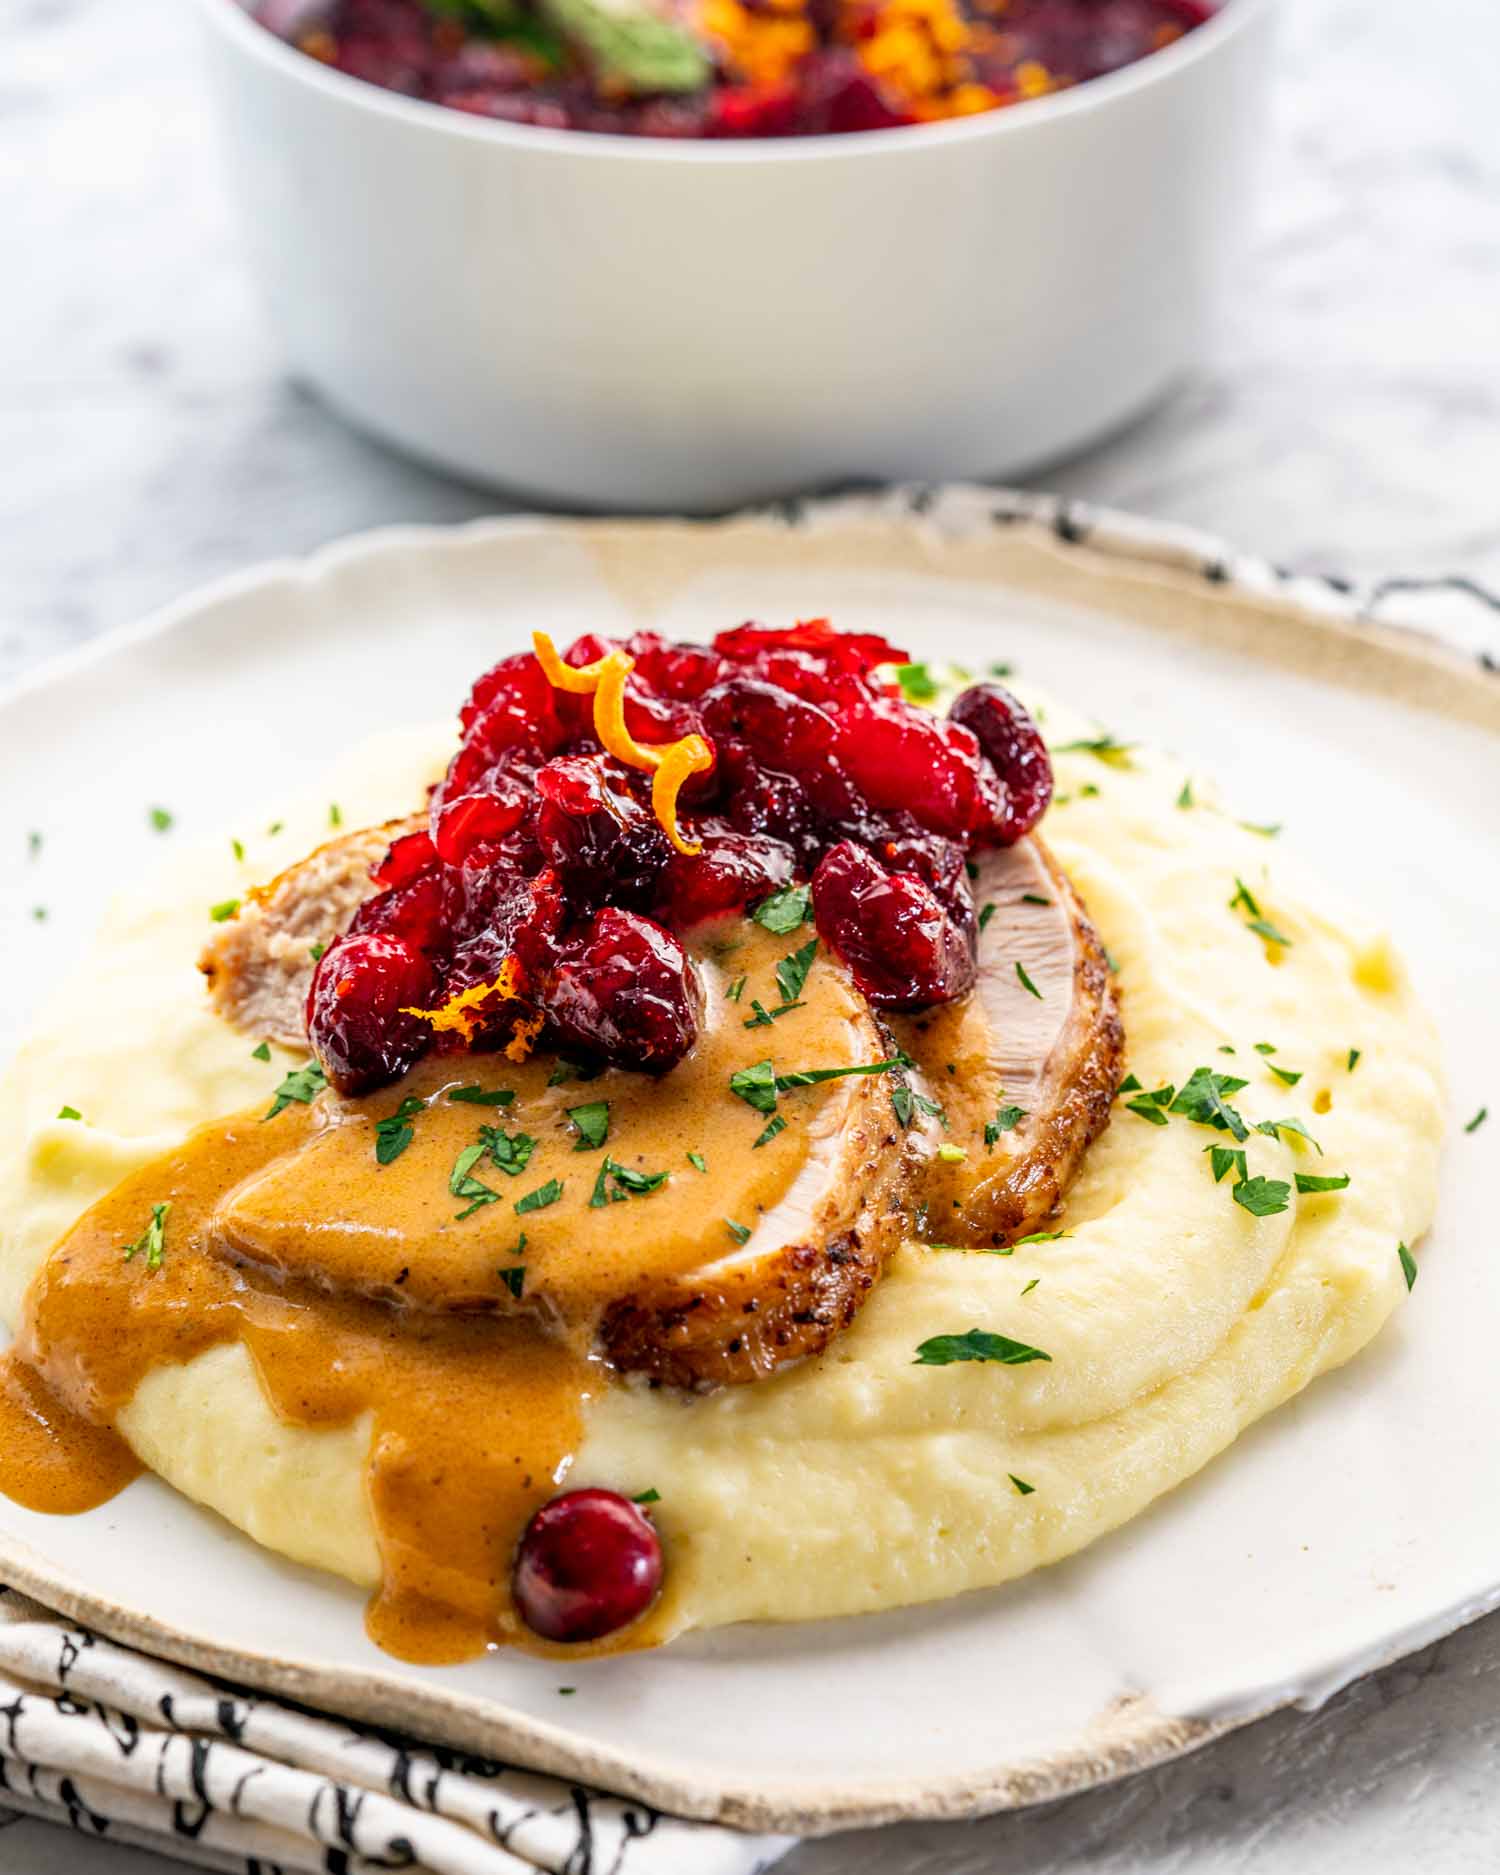 instant pot turkey breast cut in slices over a bed of mashed potatoes garnished with gravy, parsley and cranberries.